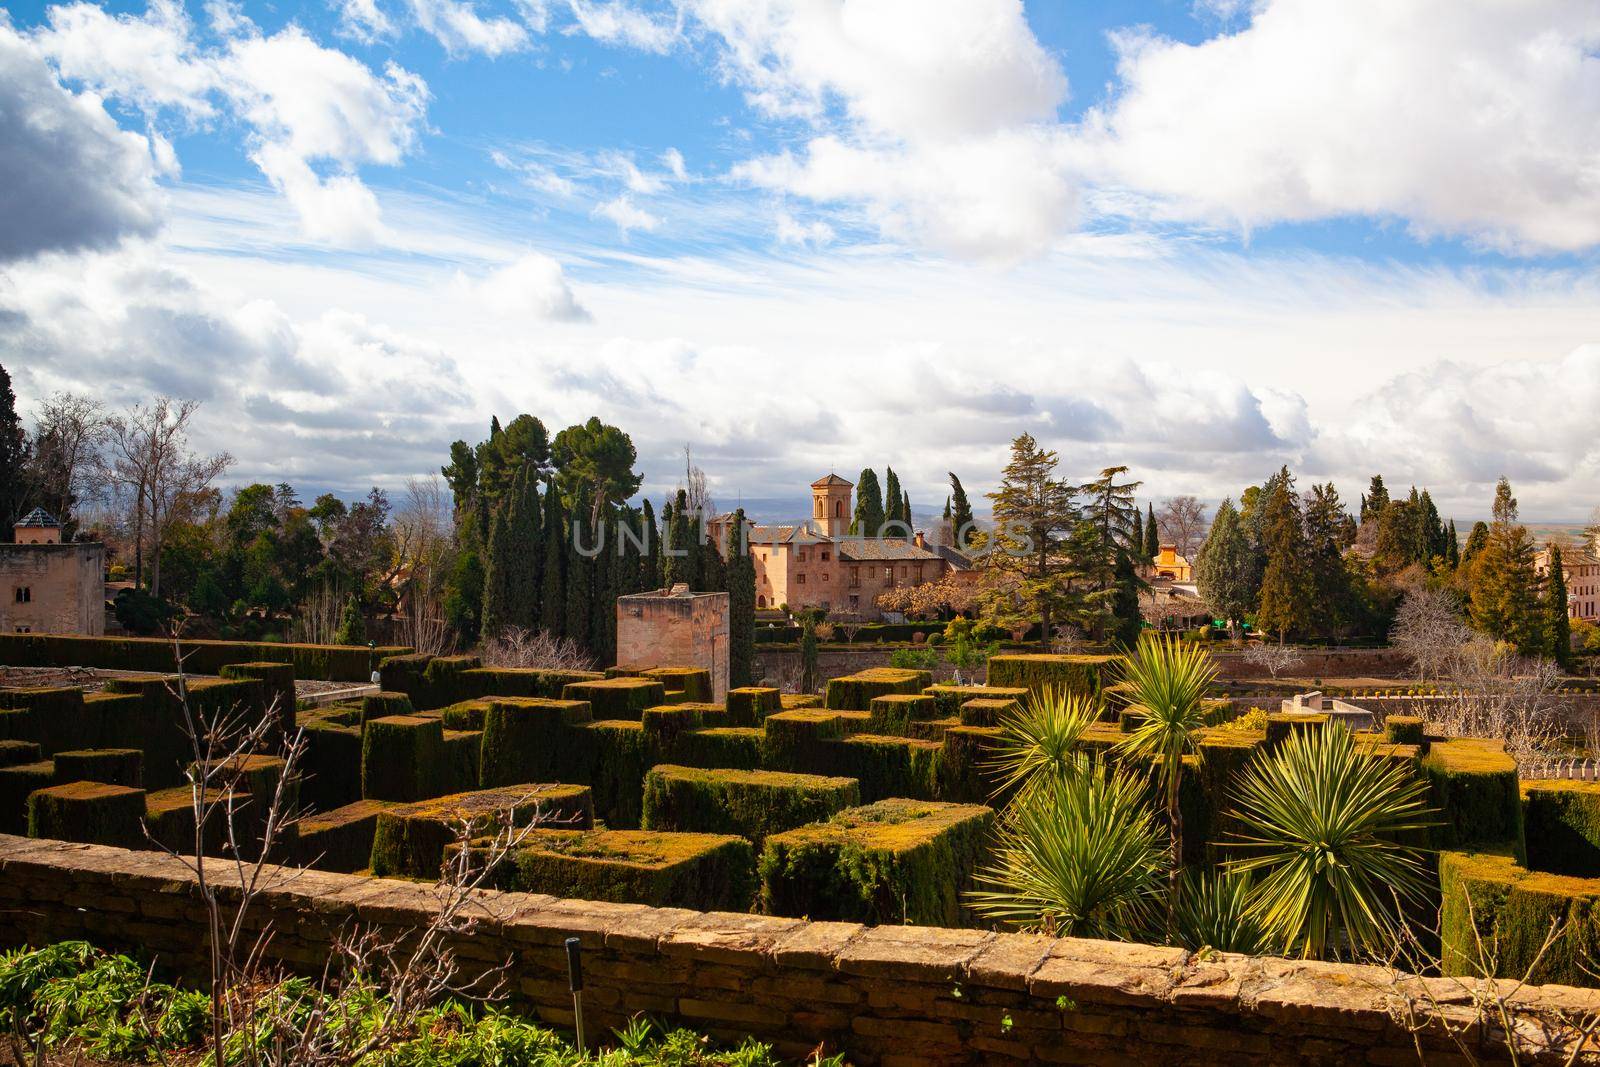 The Alhambra is a palace and fortress complex located in Granada, Andalusia, Spain. It was originally constructed as a small fortress in AD 889 on the remains of Roman fortifications